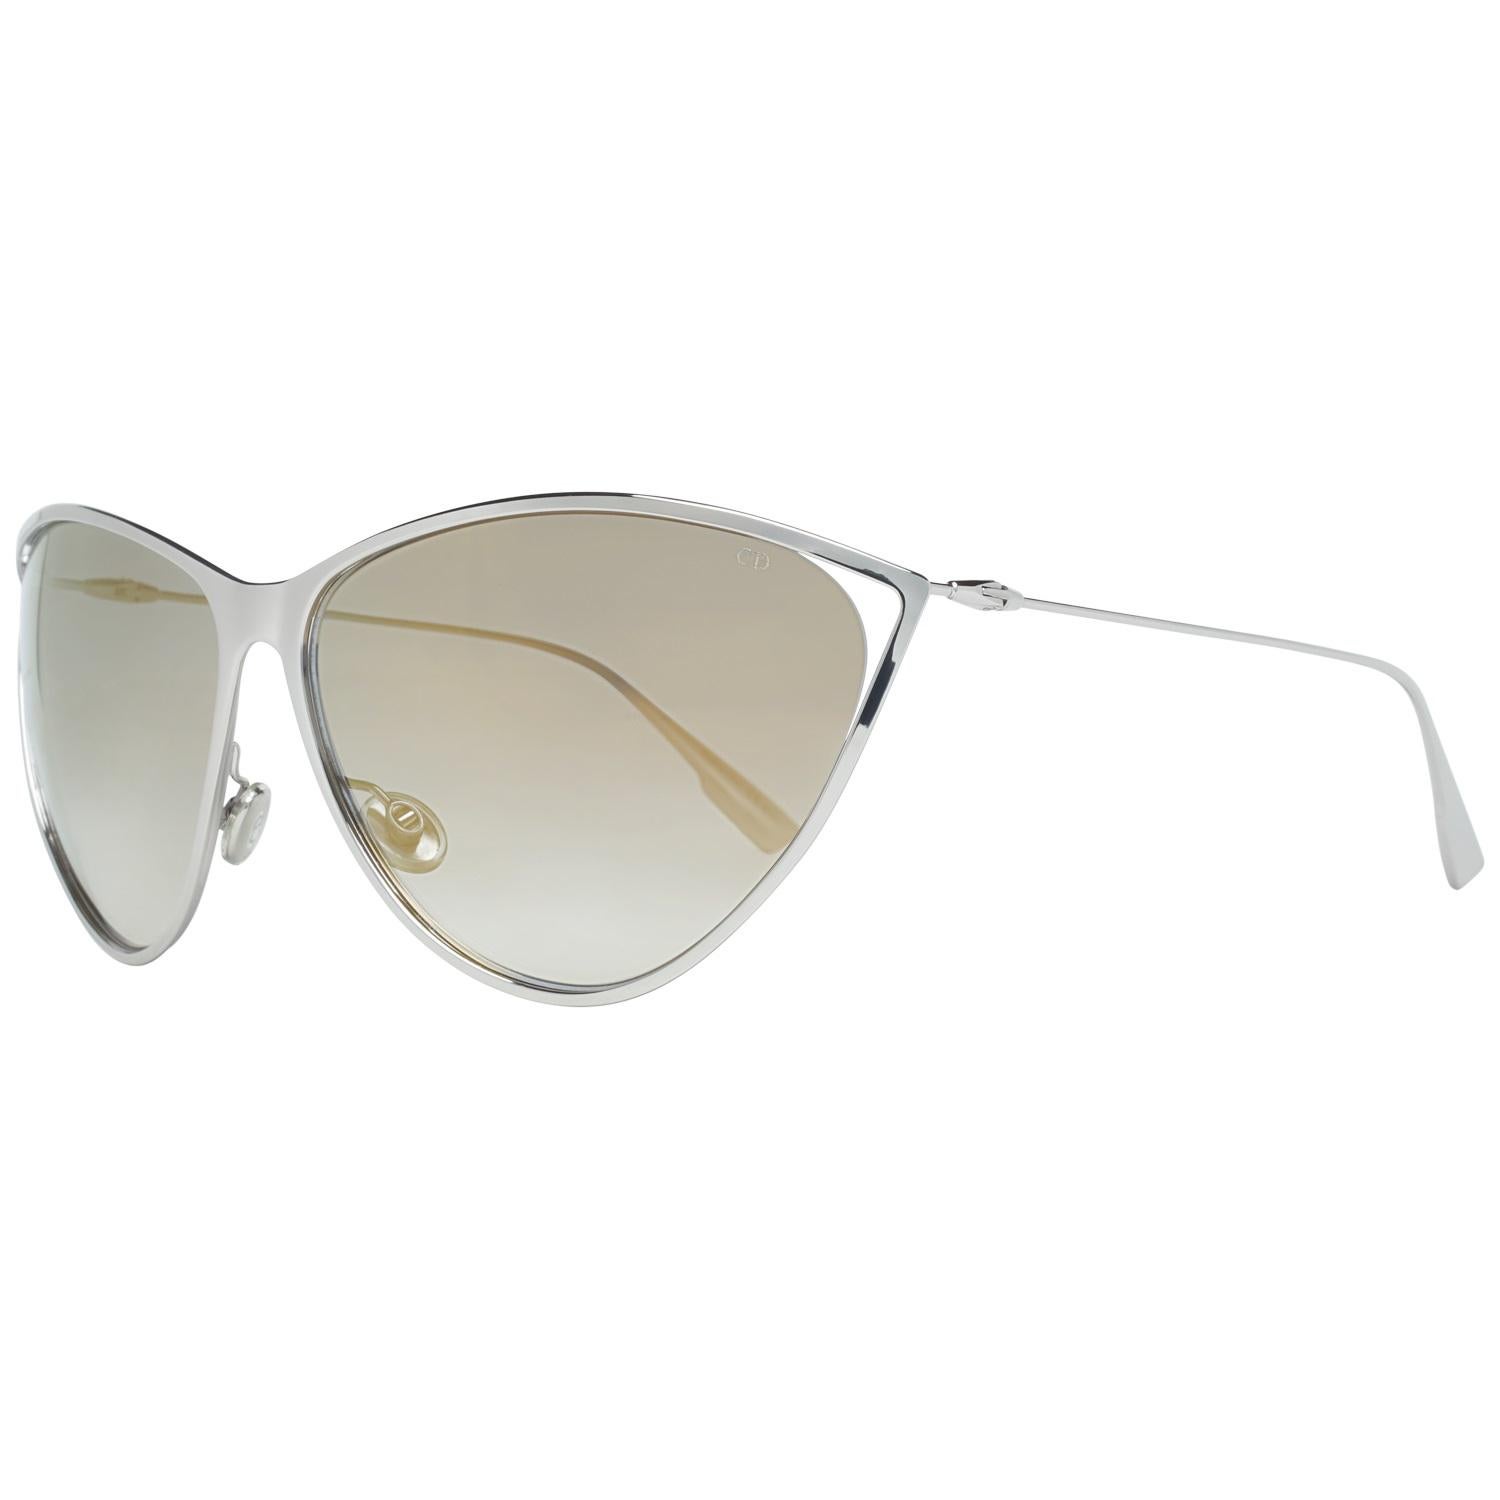 Details

MATERIAL: Metal

COLOR: Silver

MODEL: DIORNEWMOTARD 62010

GENDER: Women

COUNTRY OF MANUFACTURE: Italy

TYPE: Sunglasses

ORIGINAL CASE?: Yes

STYLE: Butterfly

OCCASION: Casual

FEATURES: Lightweight

LENS COLOR: Gold

LENS TECHNOLOGY: